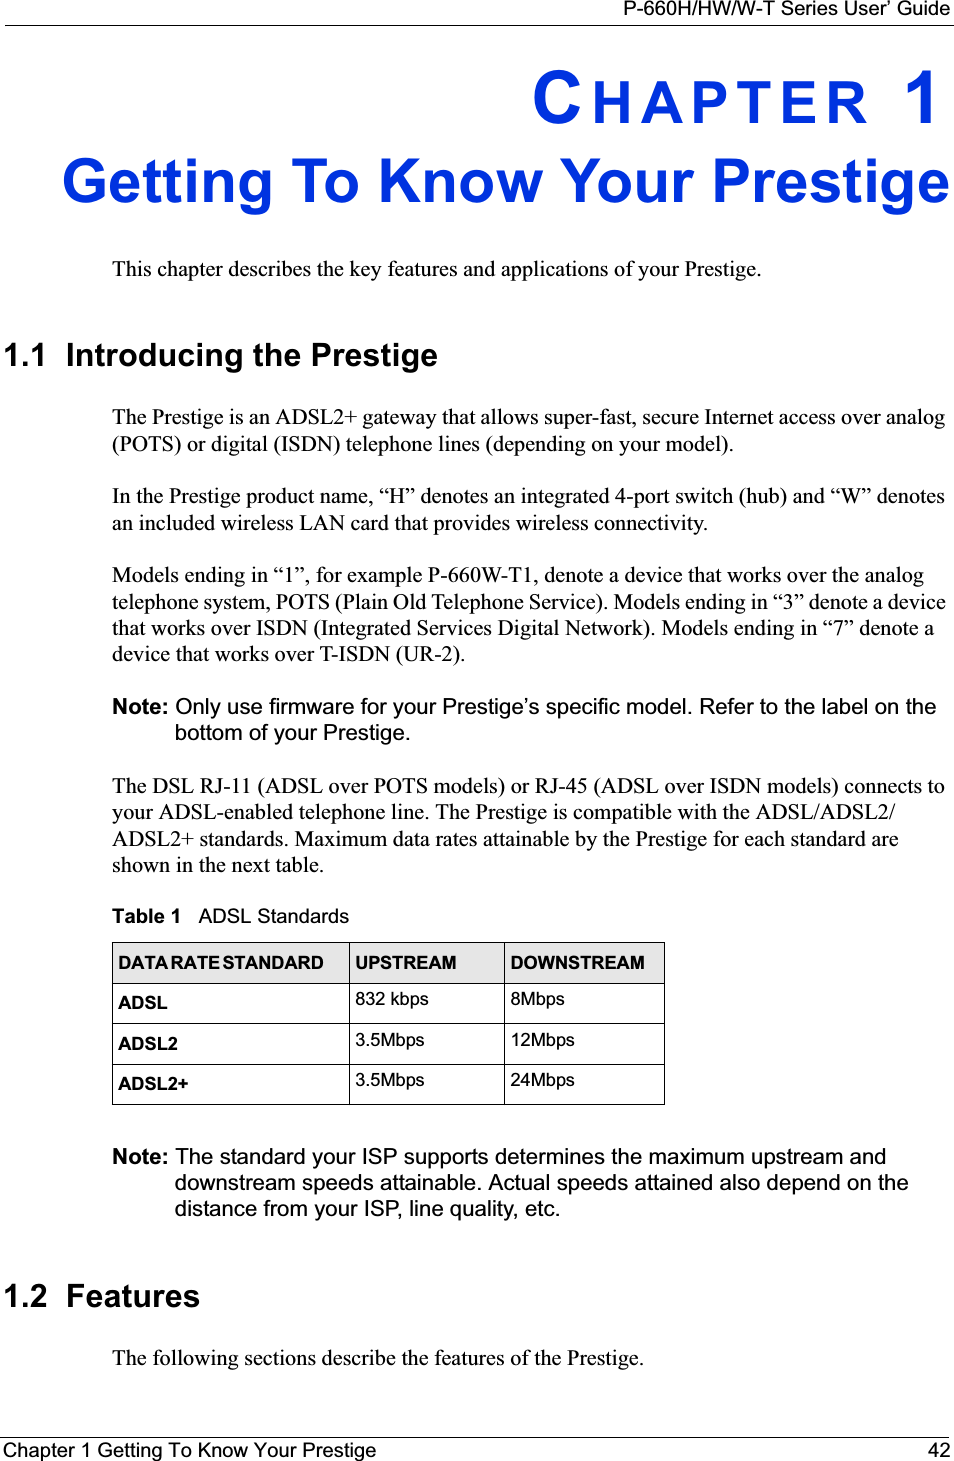 P-660H/HW/W-T Series User’ GuideChapter 1 Getting To Know Your Prestige 42CHAPTER 1Getting To Know Your PrestigeThis chapter describes the key features and applications of your Prestige.1.1  Introducing the Prestige The Prestige is an ADSL2+ gateway that allows super-fast, secure Internet access over analog (POTS) or digital (ISDN) telephone lines (depending on your model). In the Prestige product name, “H” denotes an integrated 4-port switch (hub) and “W” denotes an included wireless LAN card that provides wireless connectivity. Models ending in “1”, for example P-660W-T1, denote a device that works over the analog telephone system, POTS (Plain Old Telephone Service). Models ending in “3” denote a device that works over ISDN (Integrated Services Digital Network). Models ending in “7” denote a device that works over T-ISDN (UR-2).Note: Only use firmware for your Prestige’s specific model. Refer to the label on the bottom of your Prestige.The DSL RJ-11 (ADSL over POTS models) or RJ-45 (ADSL over ISDN models) connects to your ADSL-enabled telephone line. The Prestige is compatible with the ADSL/ADSL2/ADSL2+ standards. Maximum data rates attainable by the Prestige for each standard are shown in the next table.Note: The standard your ISP supports determines the maximum upstream and downstream speeds attainable. Actual speeds attained also depend on the distance from your ISP, line quality, etc.1.2  FeaturesThe following sections describe the features of the Prestige. Table 1   ADSL StandardsDATA RATE STANDARD         UPSTREAM DOWNSTREAMADSL 832 kbps 8MbpsADSL2 3.5Mbps 12MbpsADSL2+ 3.5Mbps 24Mbps